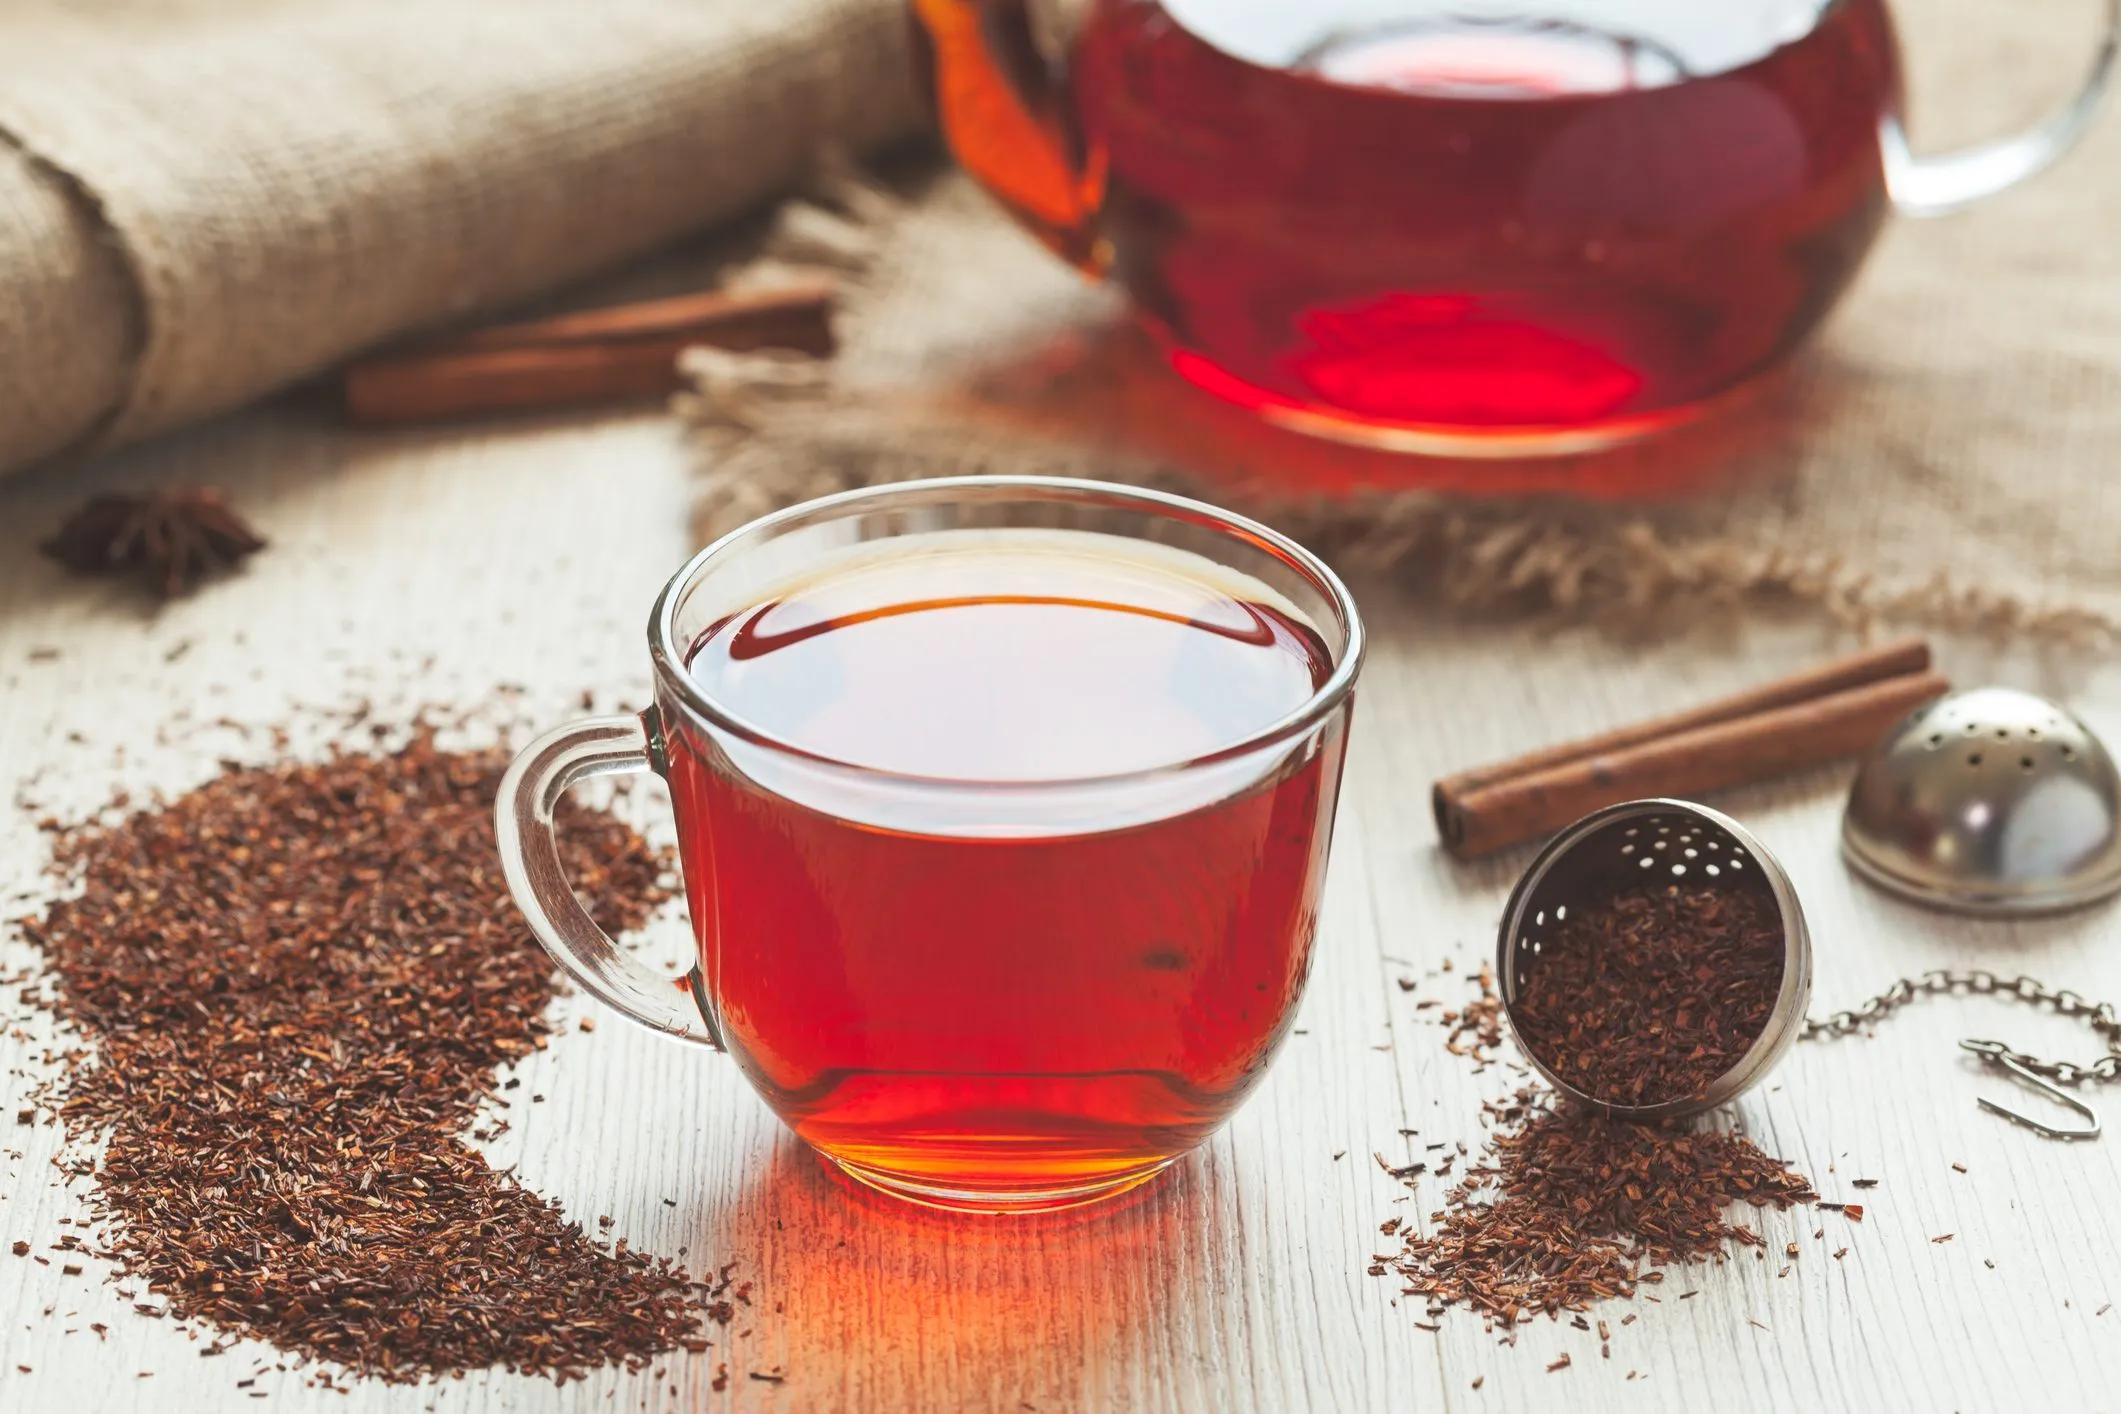 Rooibos: healthy characteristics and use of the African red tea